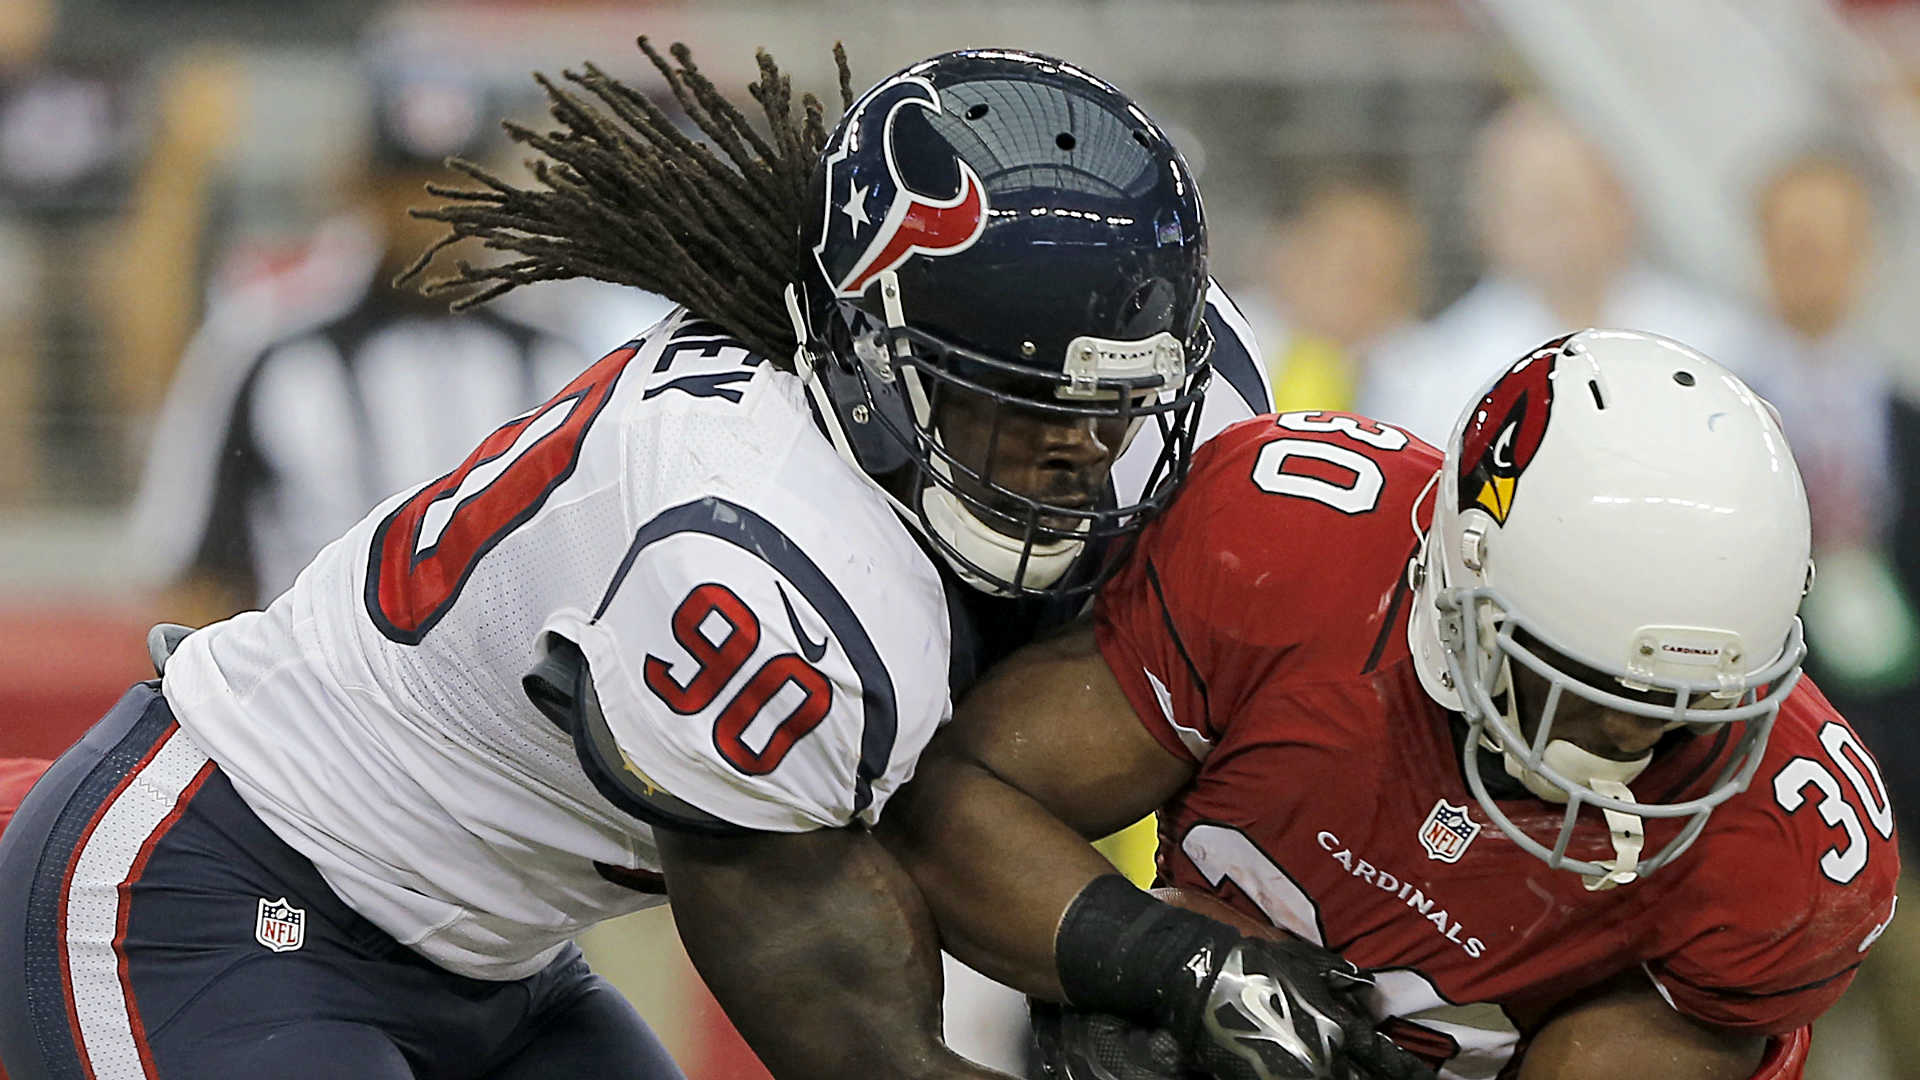 Jadeveon Clowney debuts for Texans, begins with bang. NFL